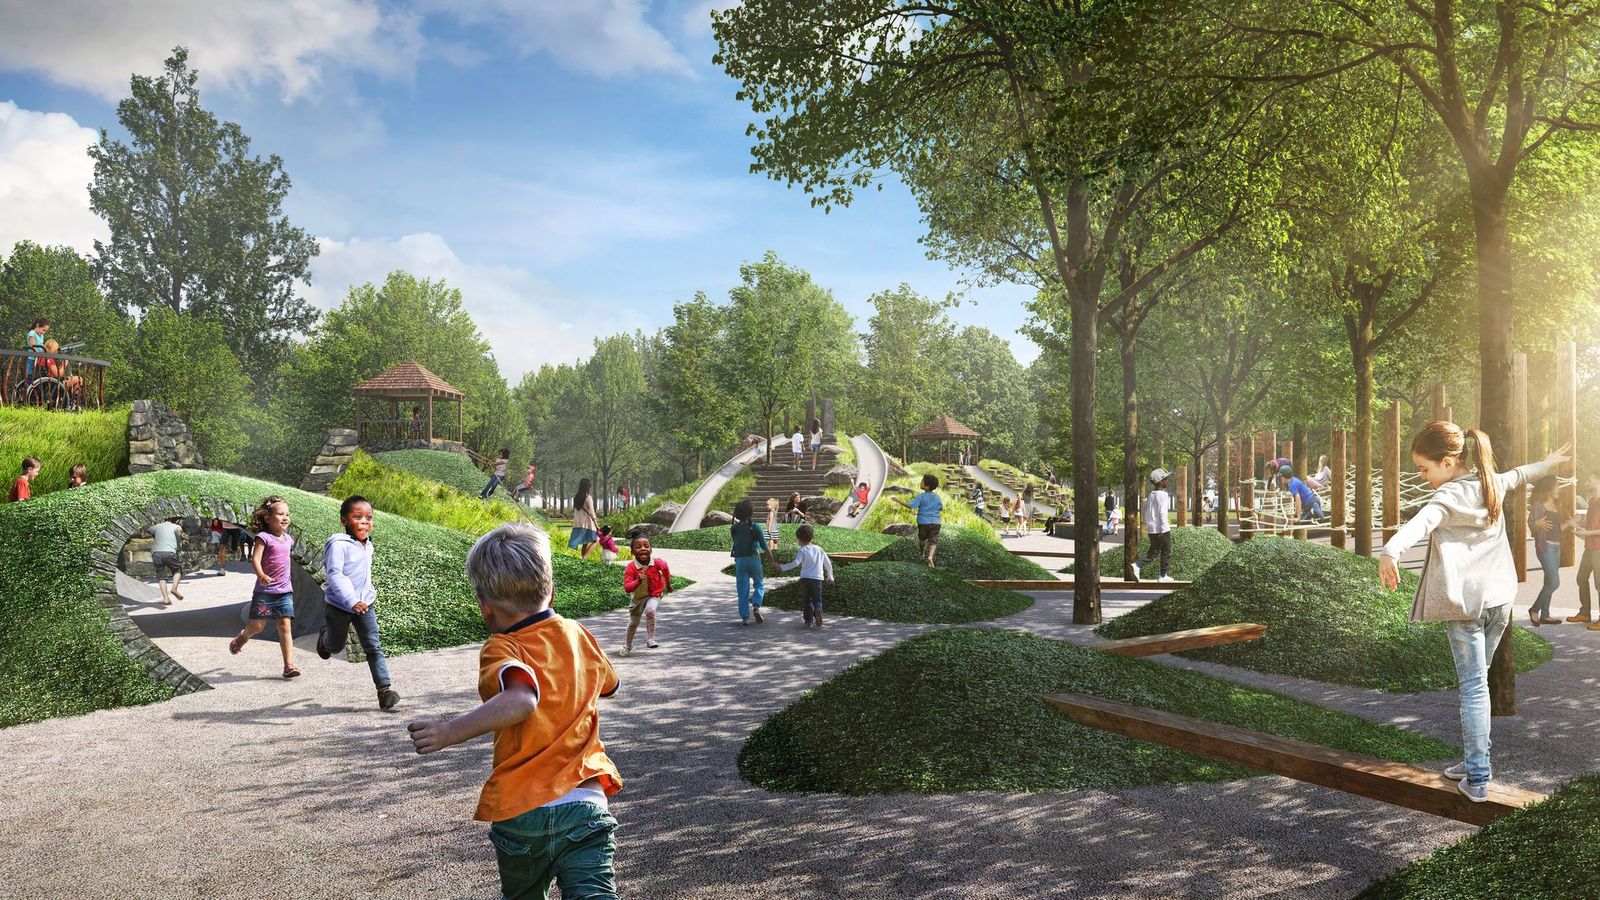 Synnex has made numerous donations to Greenville area charities and projects, including the incoming playground at Unity Park. (Rendering/Provided)